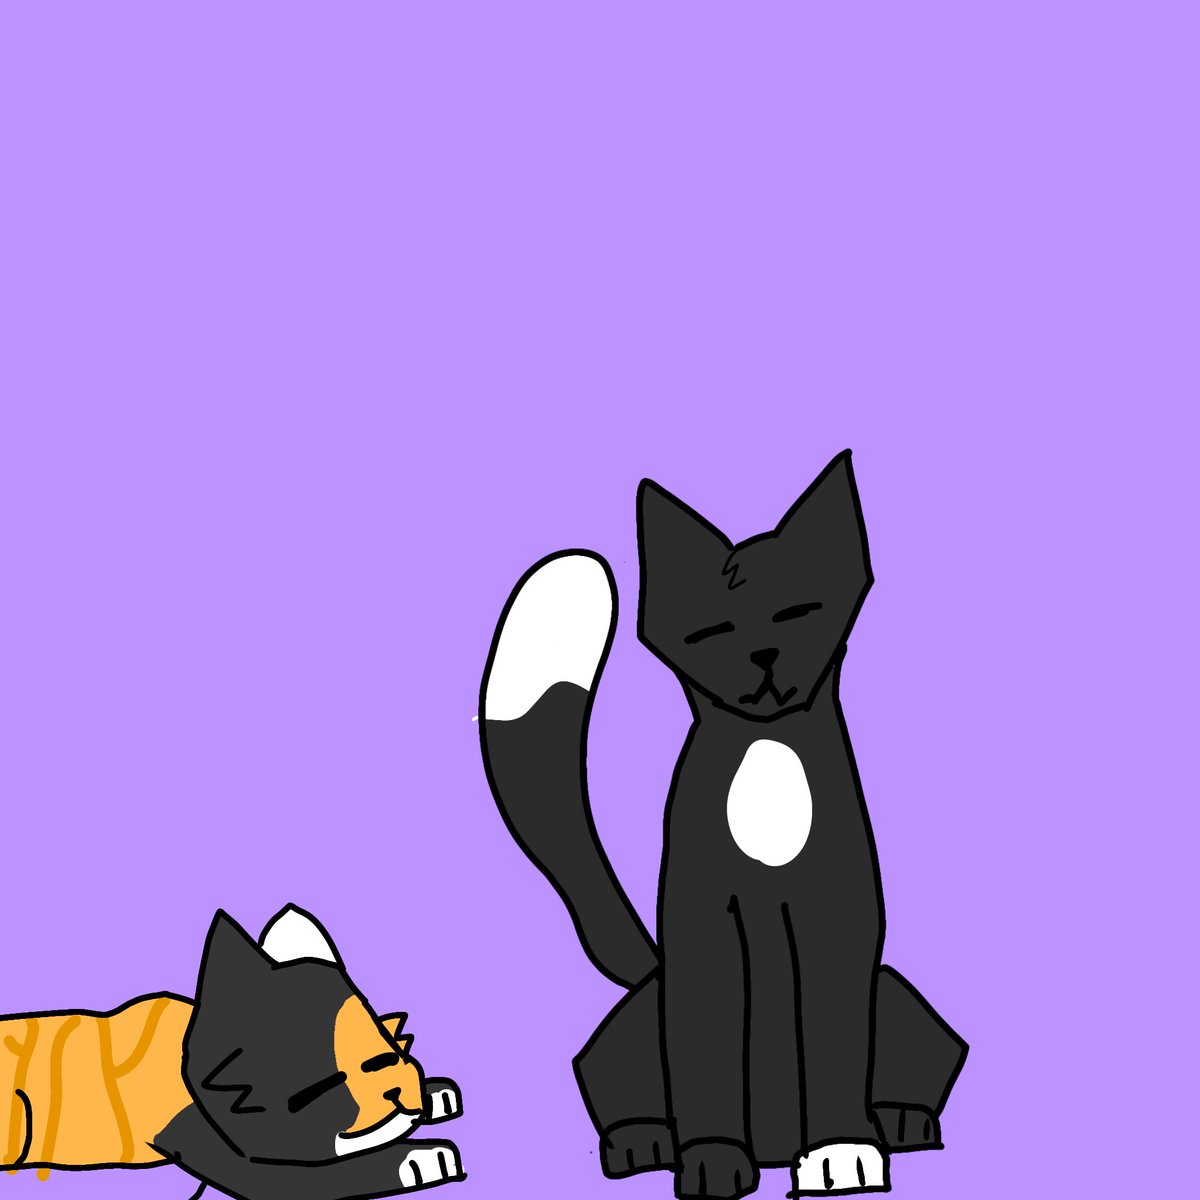 Day 7: Hanging out with one of my fav characters (Ravenpaw)